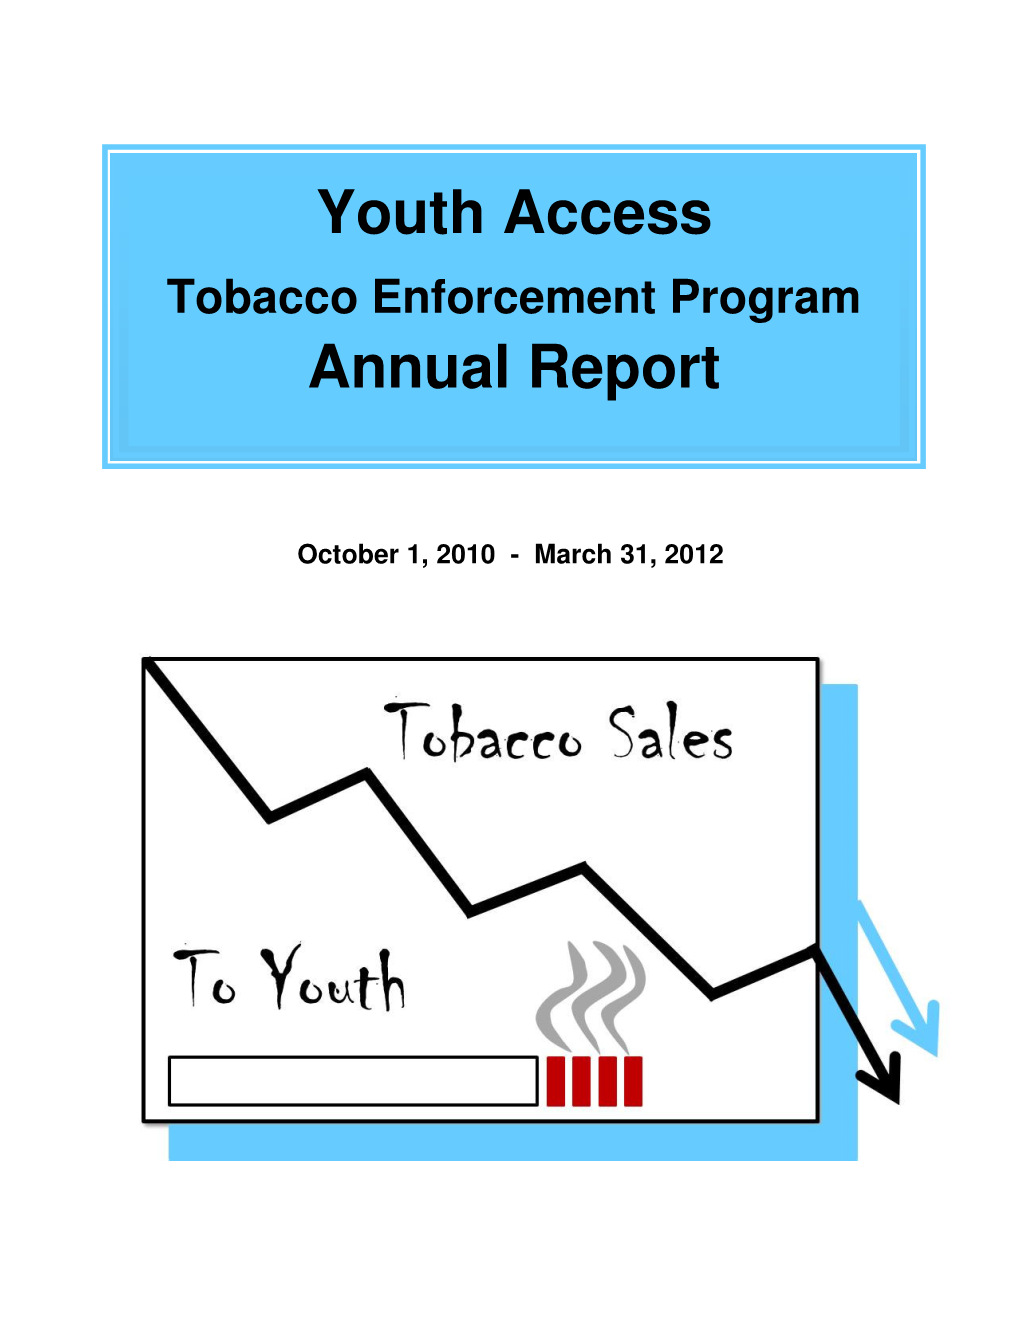 Youth Acccess Tobacco Enforcement Program Annual Report: October